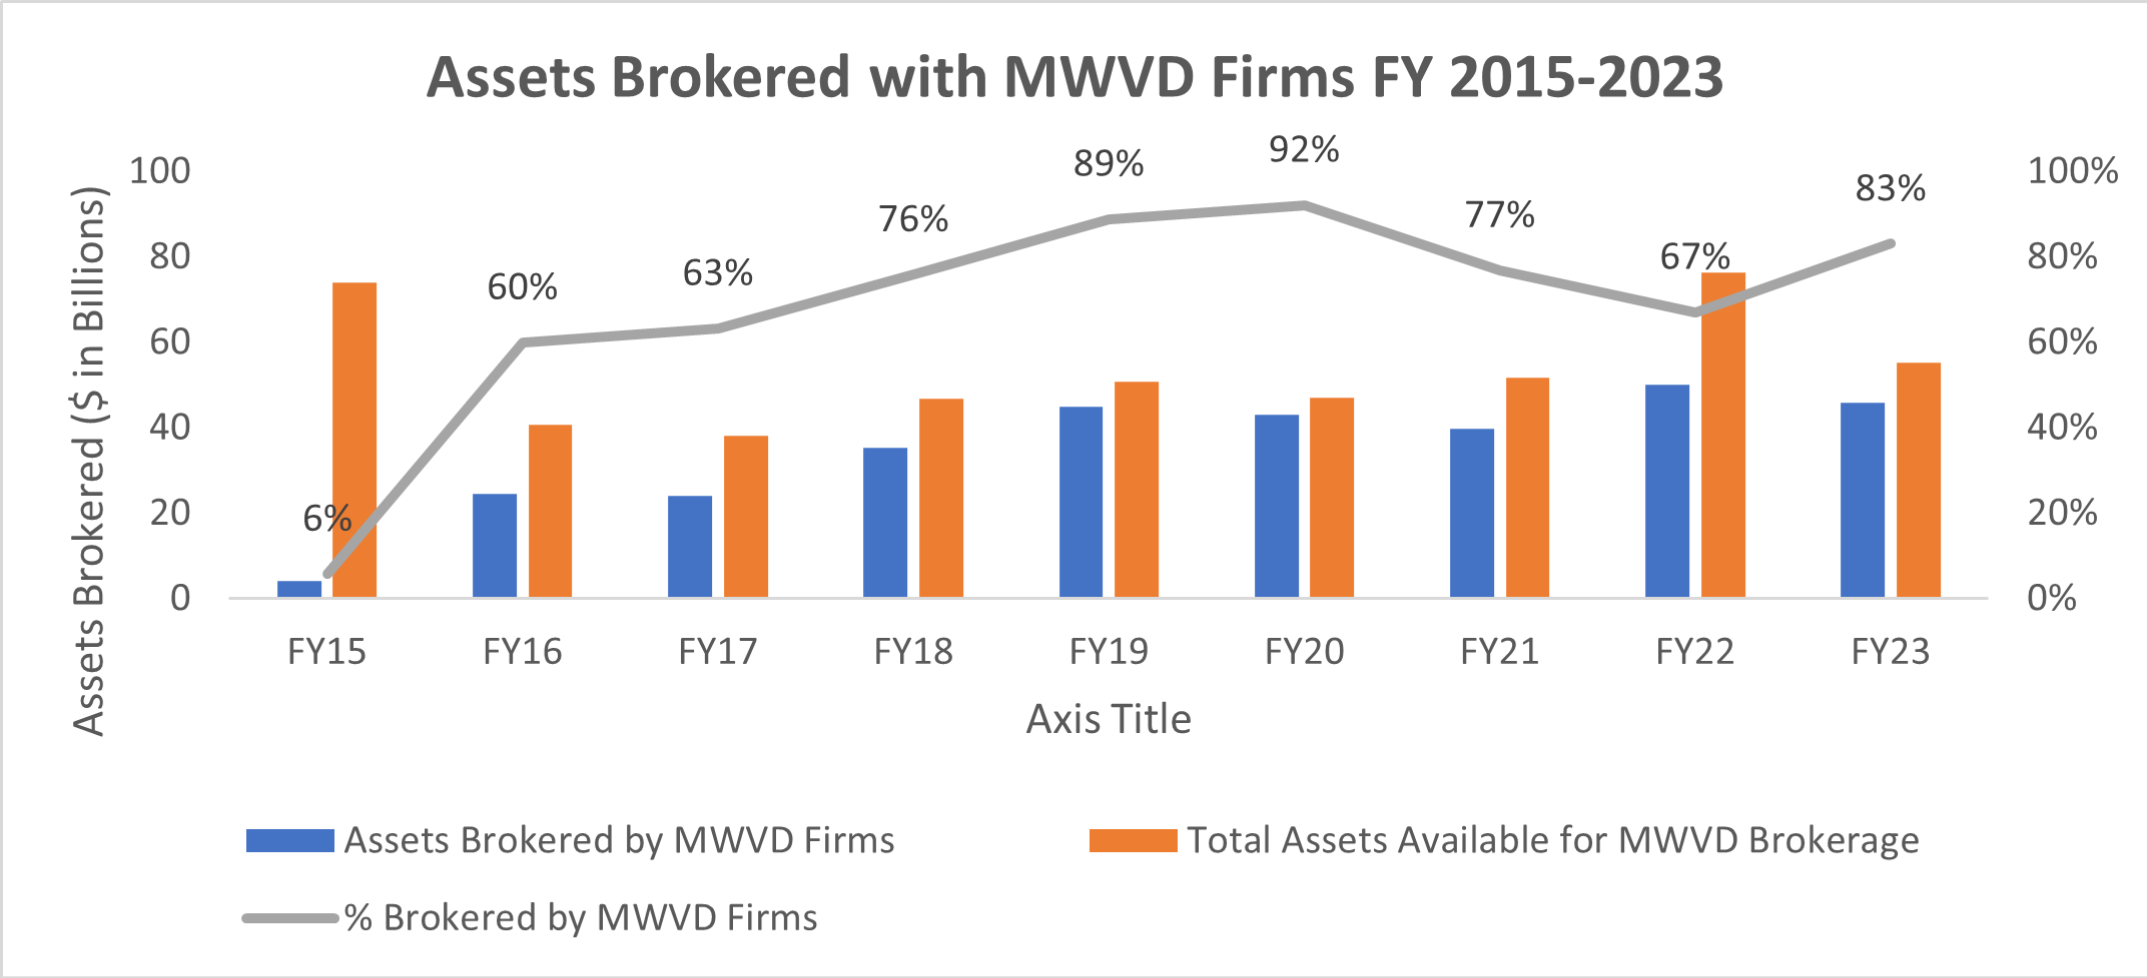 Assets Brokered by MWVD Firms